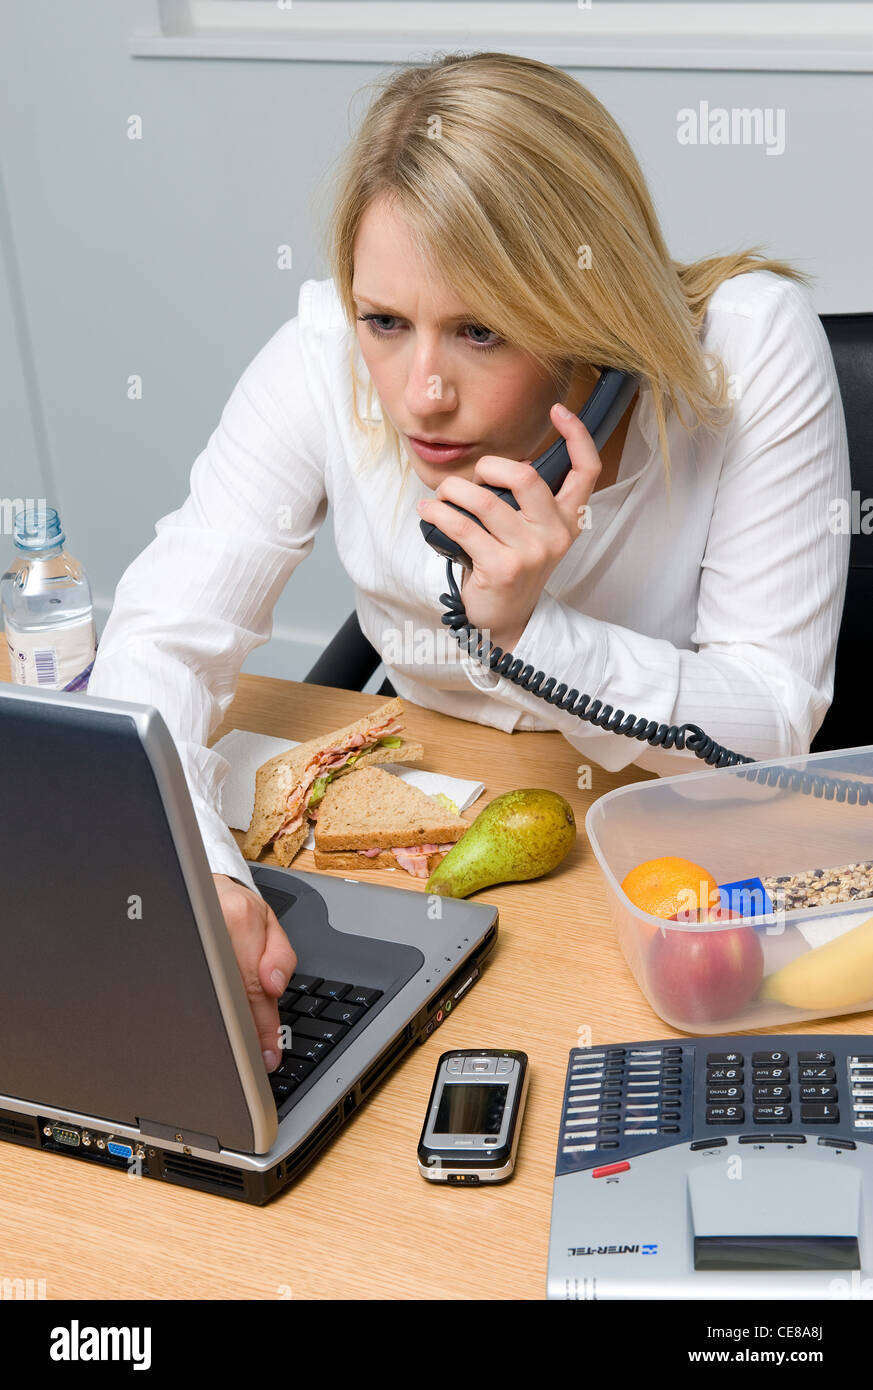 female office worker eating working lunch Stock Photo